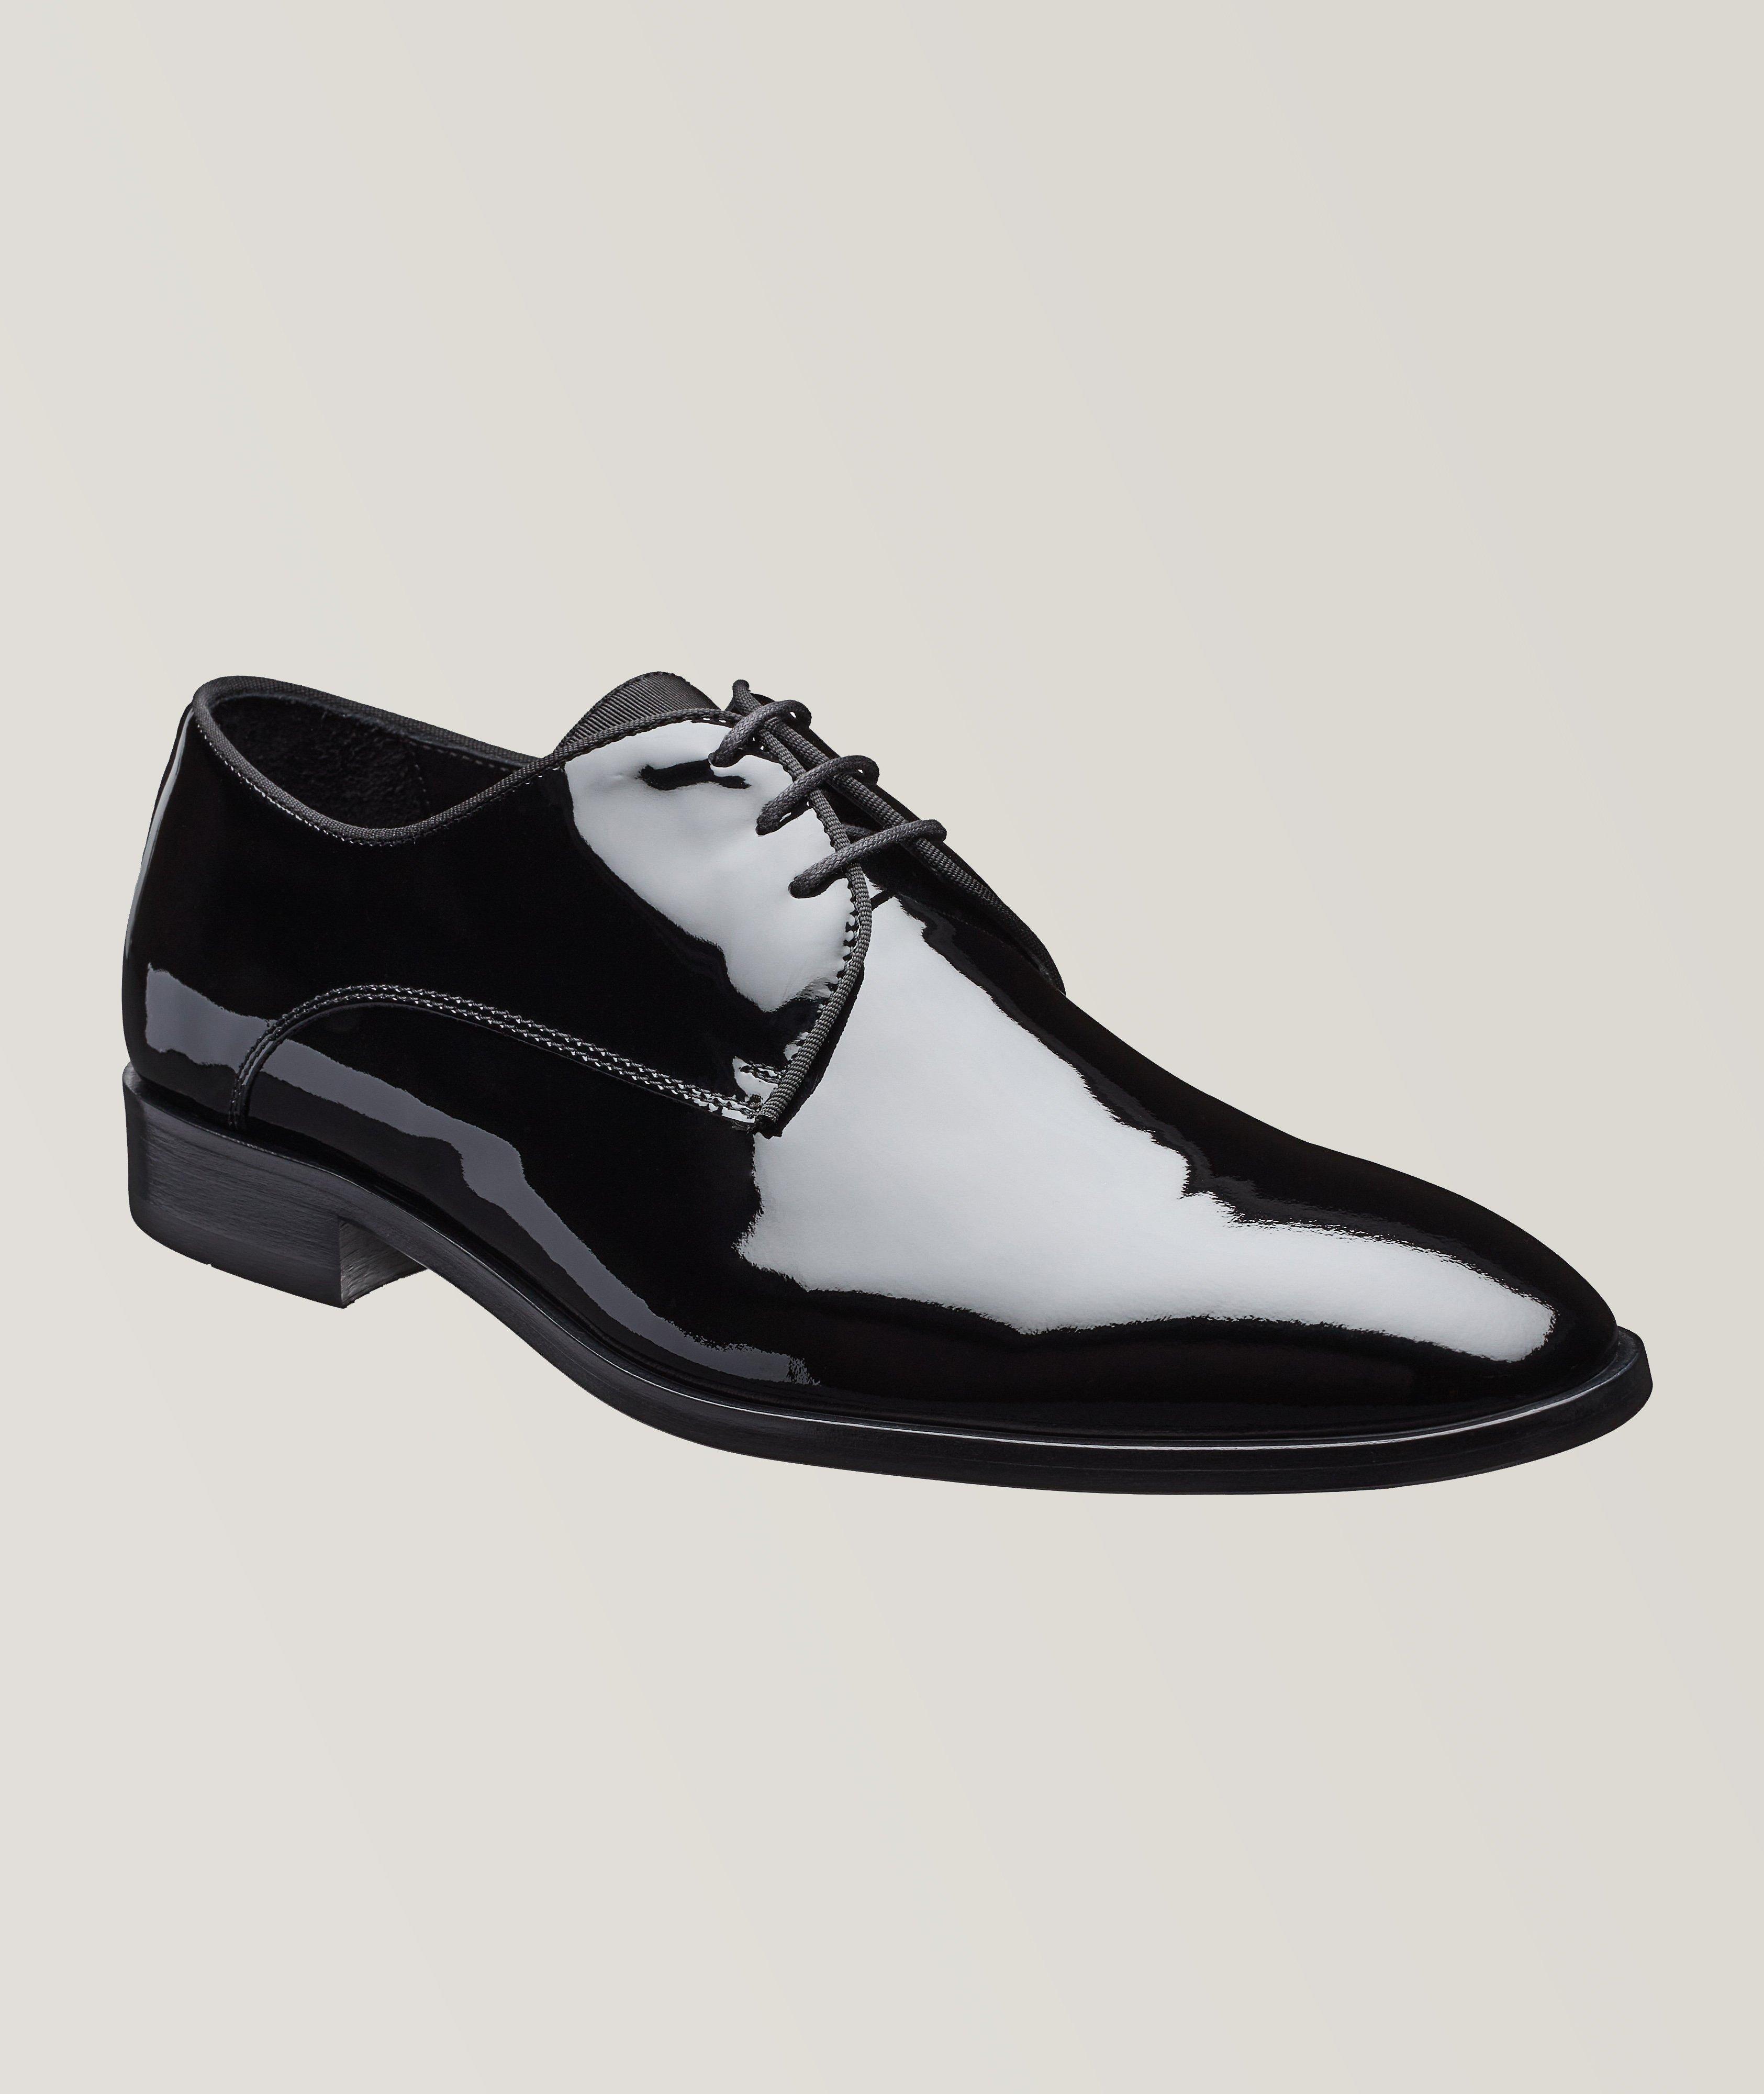 Glossy Patent Leather Derby image 0